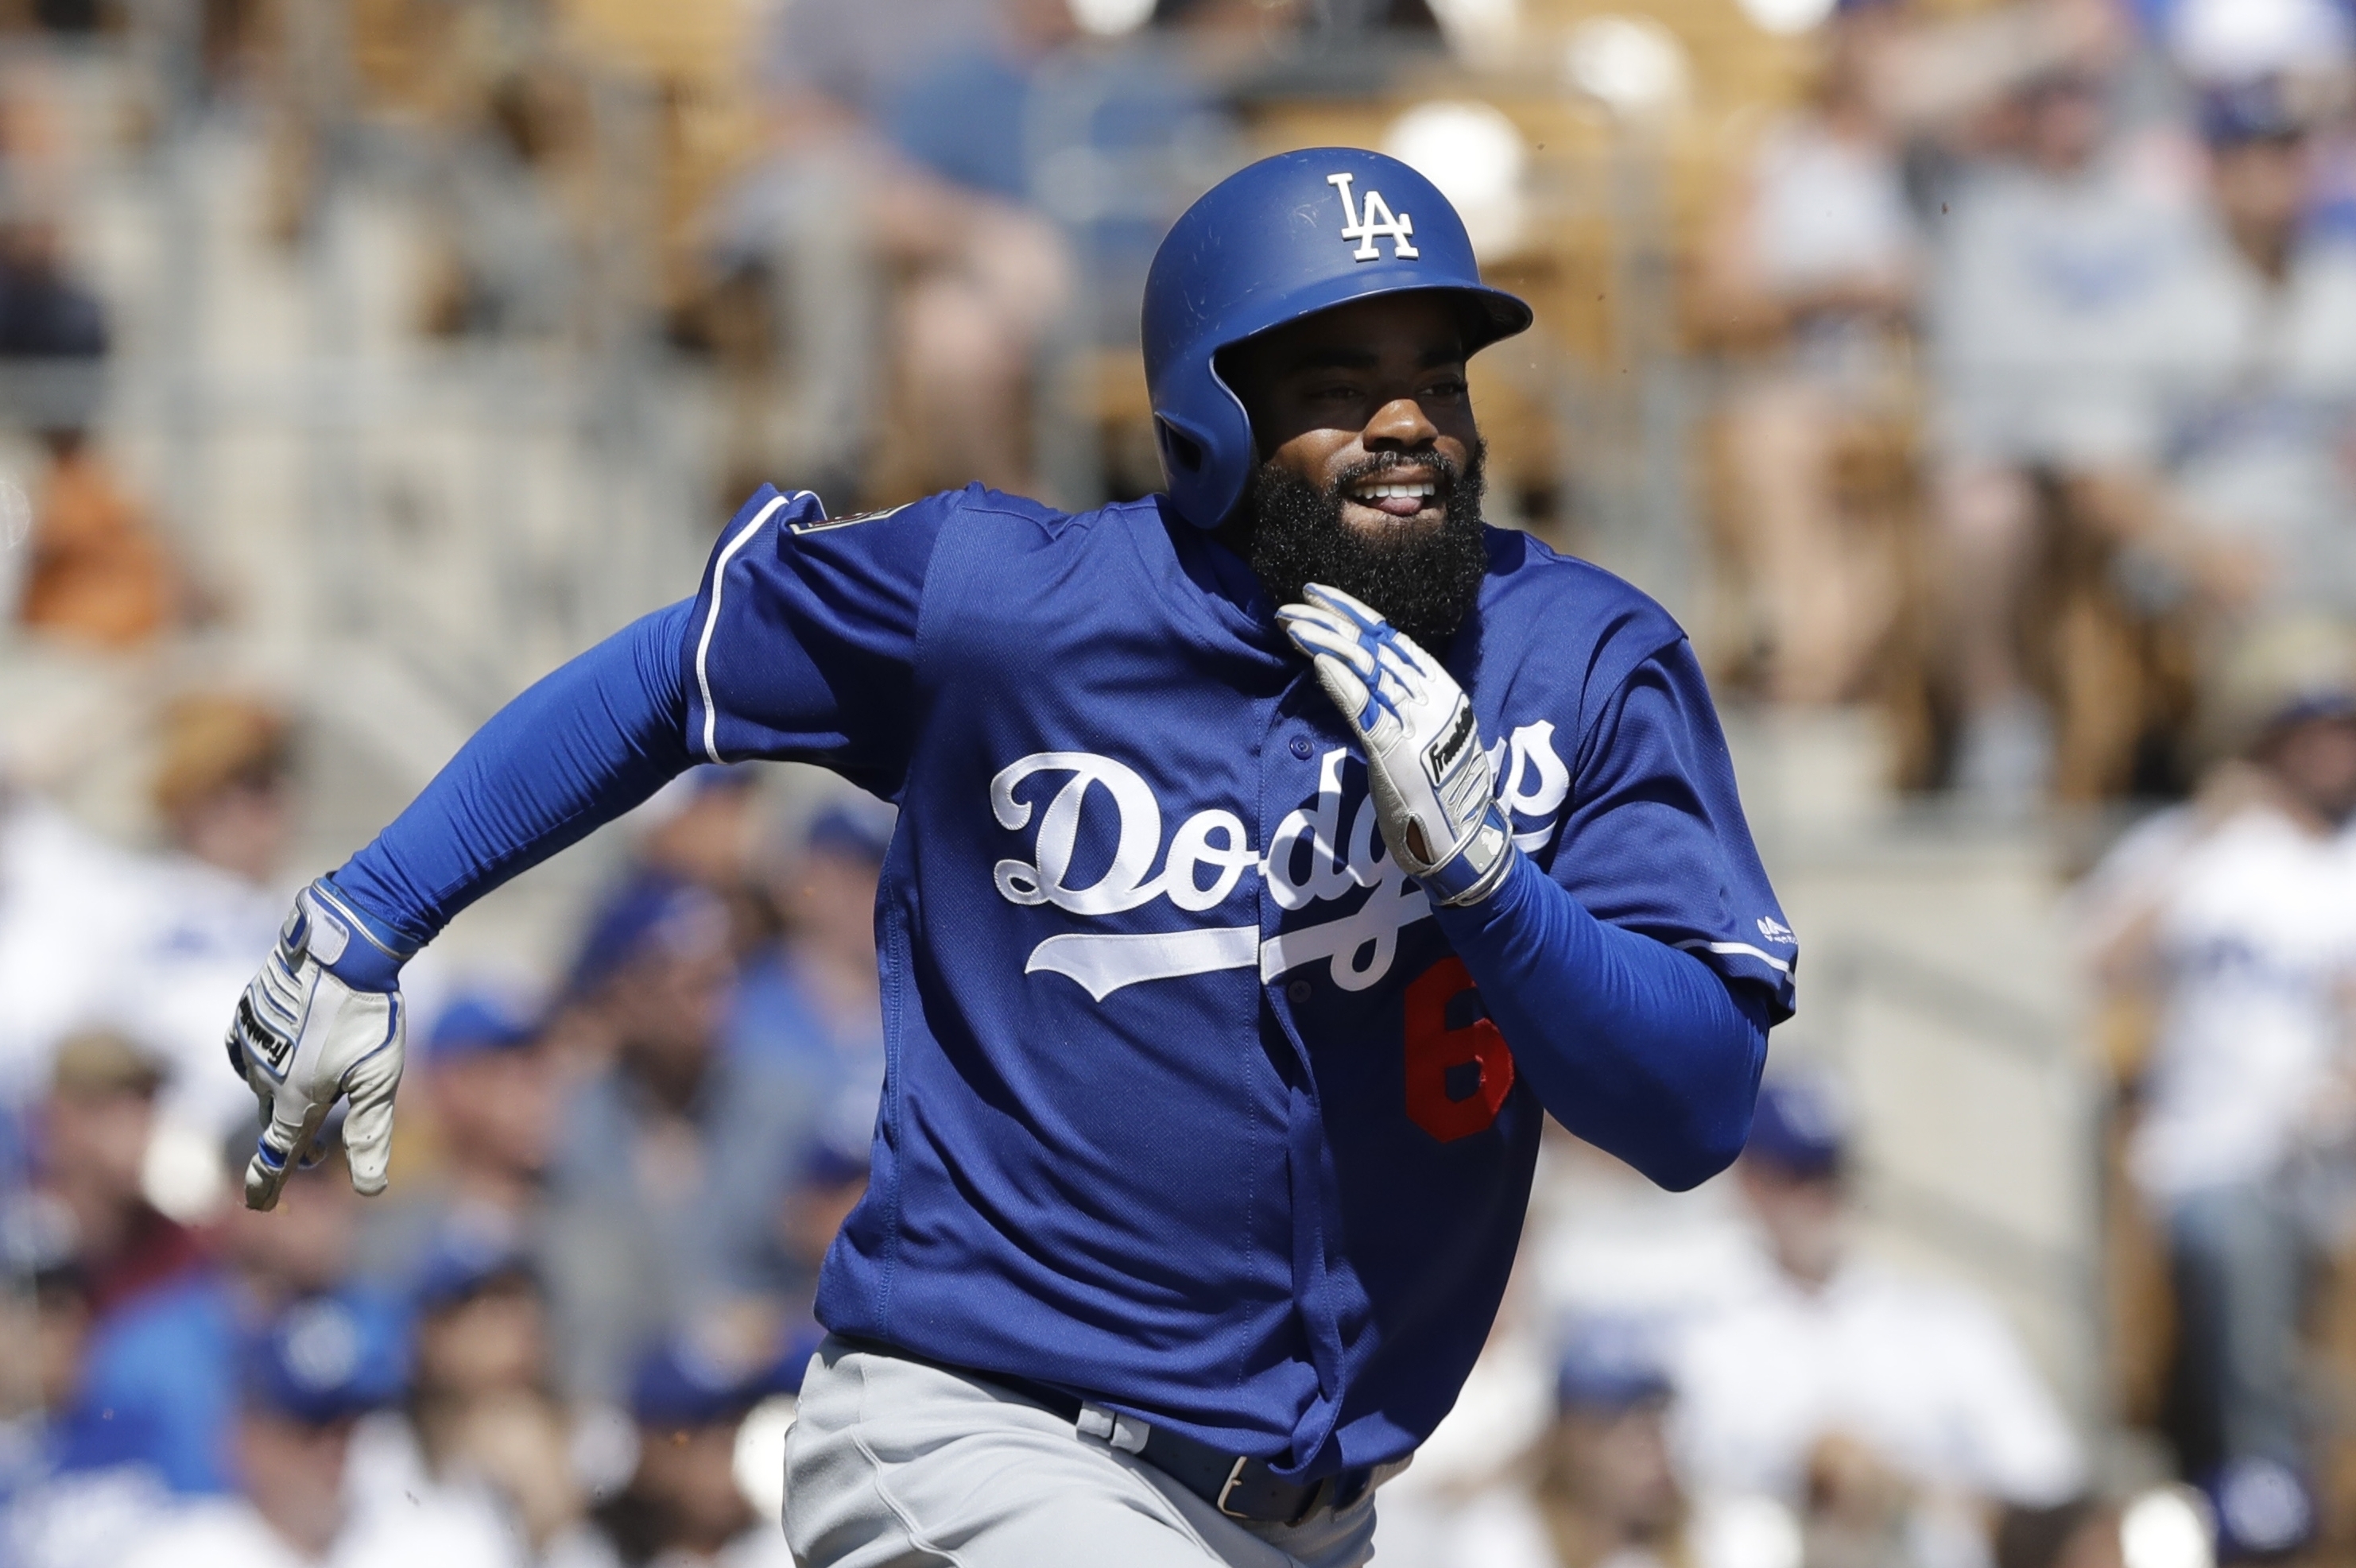 Dodgers' Andrew Toles 'Really Needs Help' After Arrest, Says Father, News,  Scores, Highlights, Stats, and Rumors